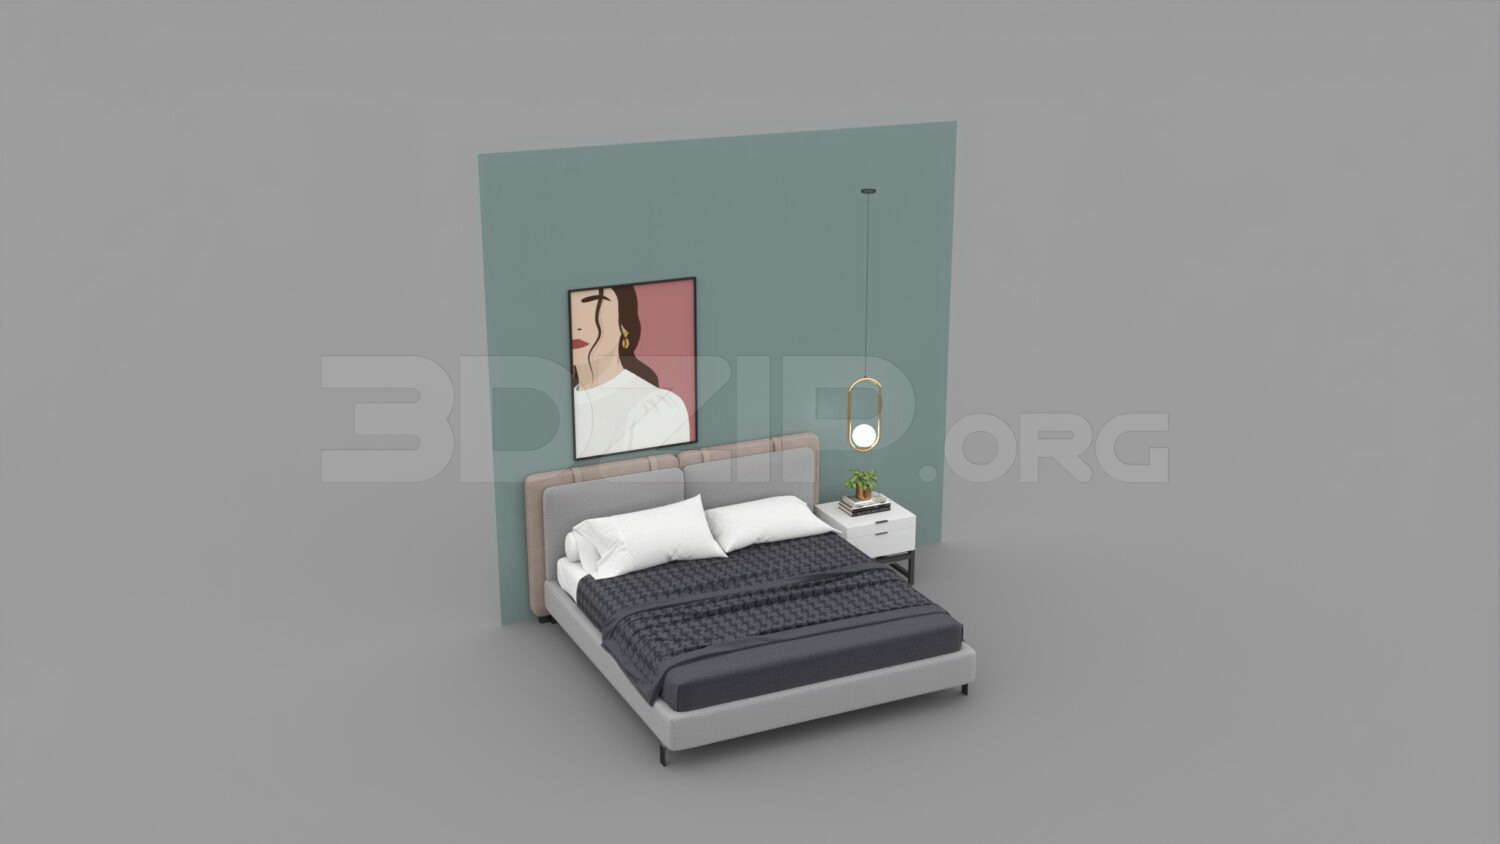 1329. Download Free Bed Model By Hoang Thoa